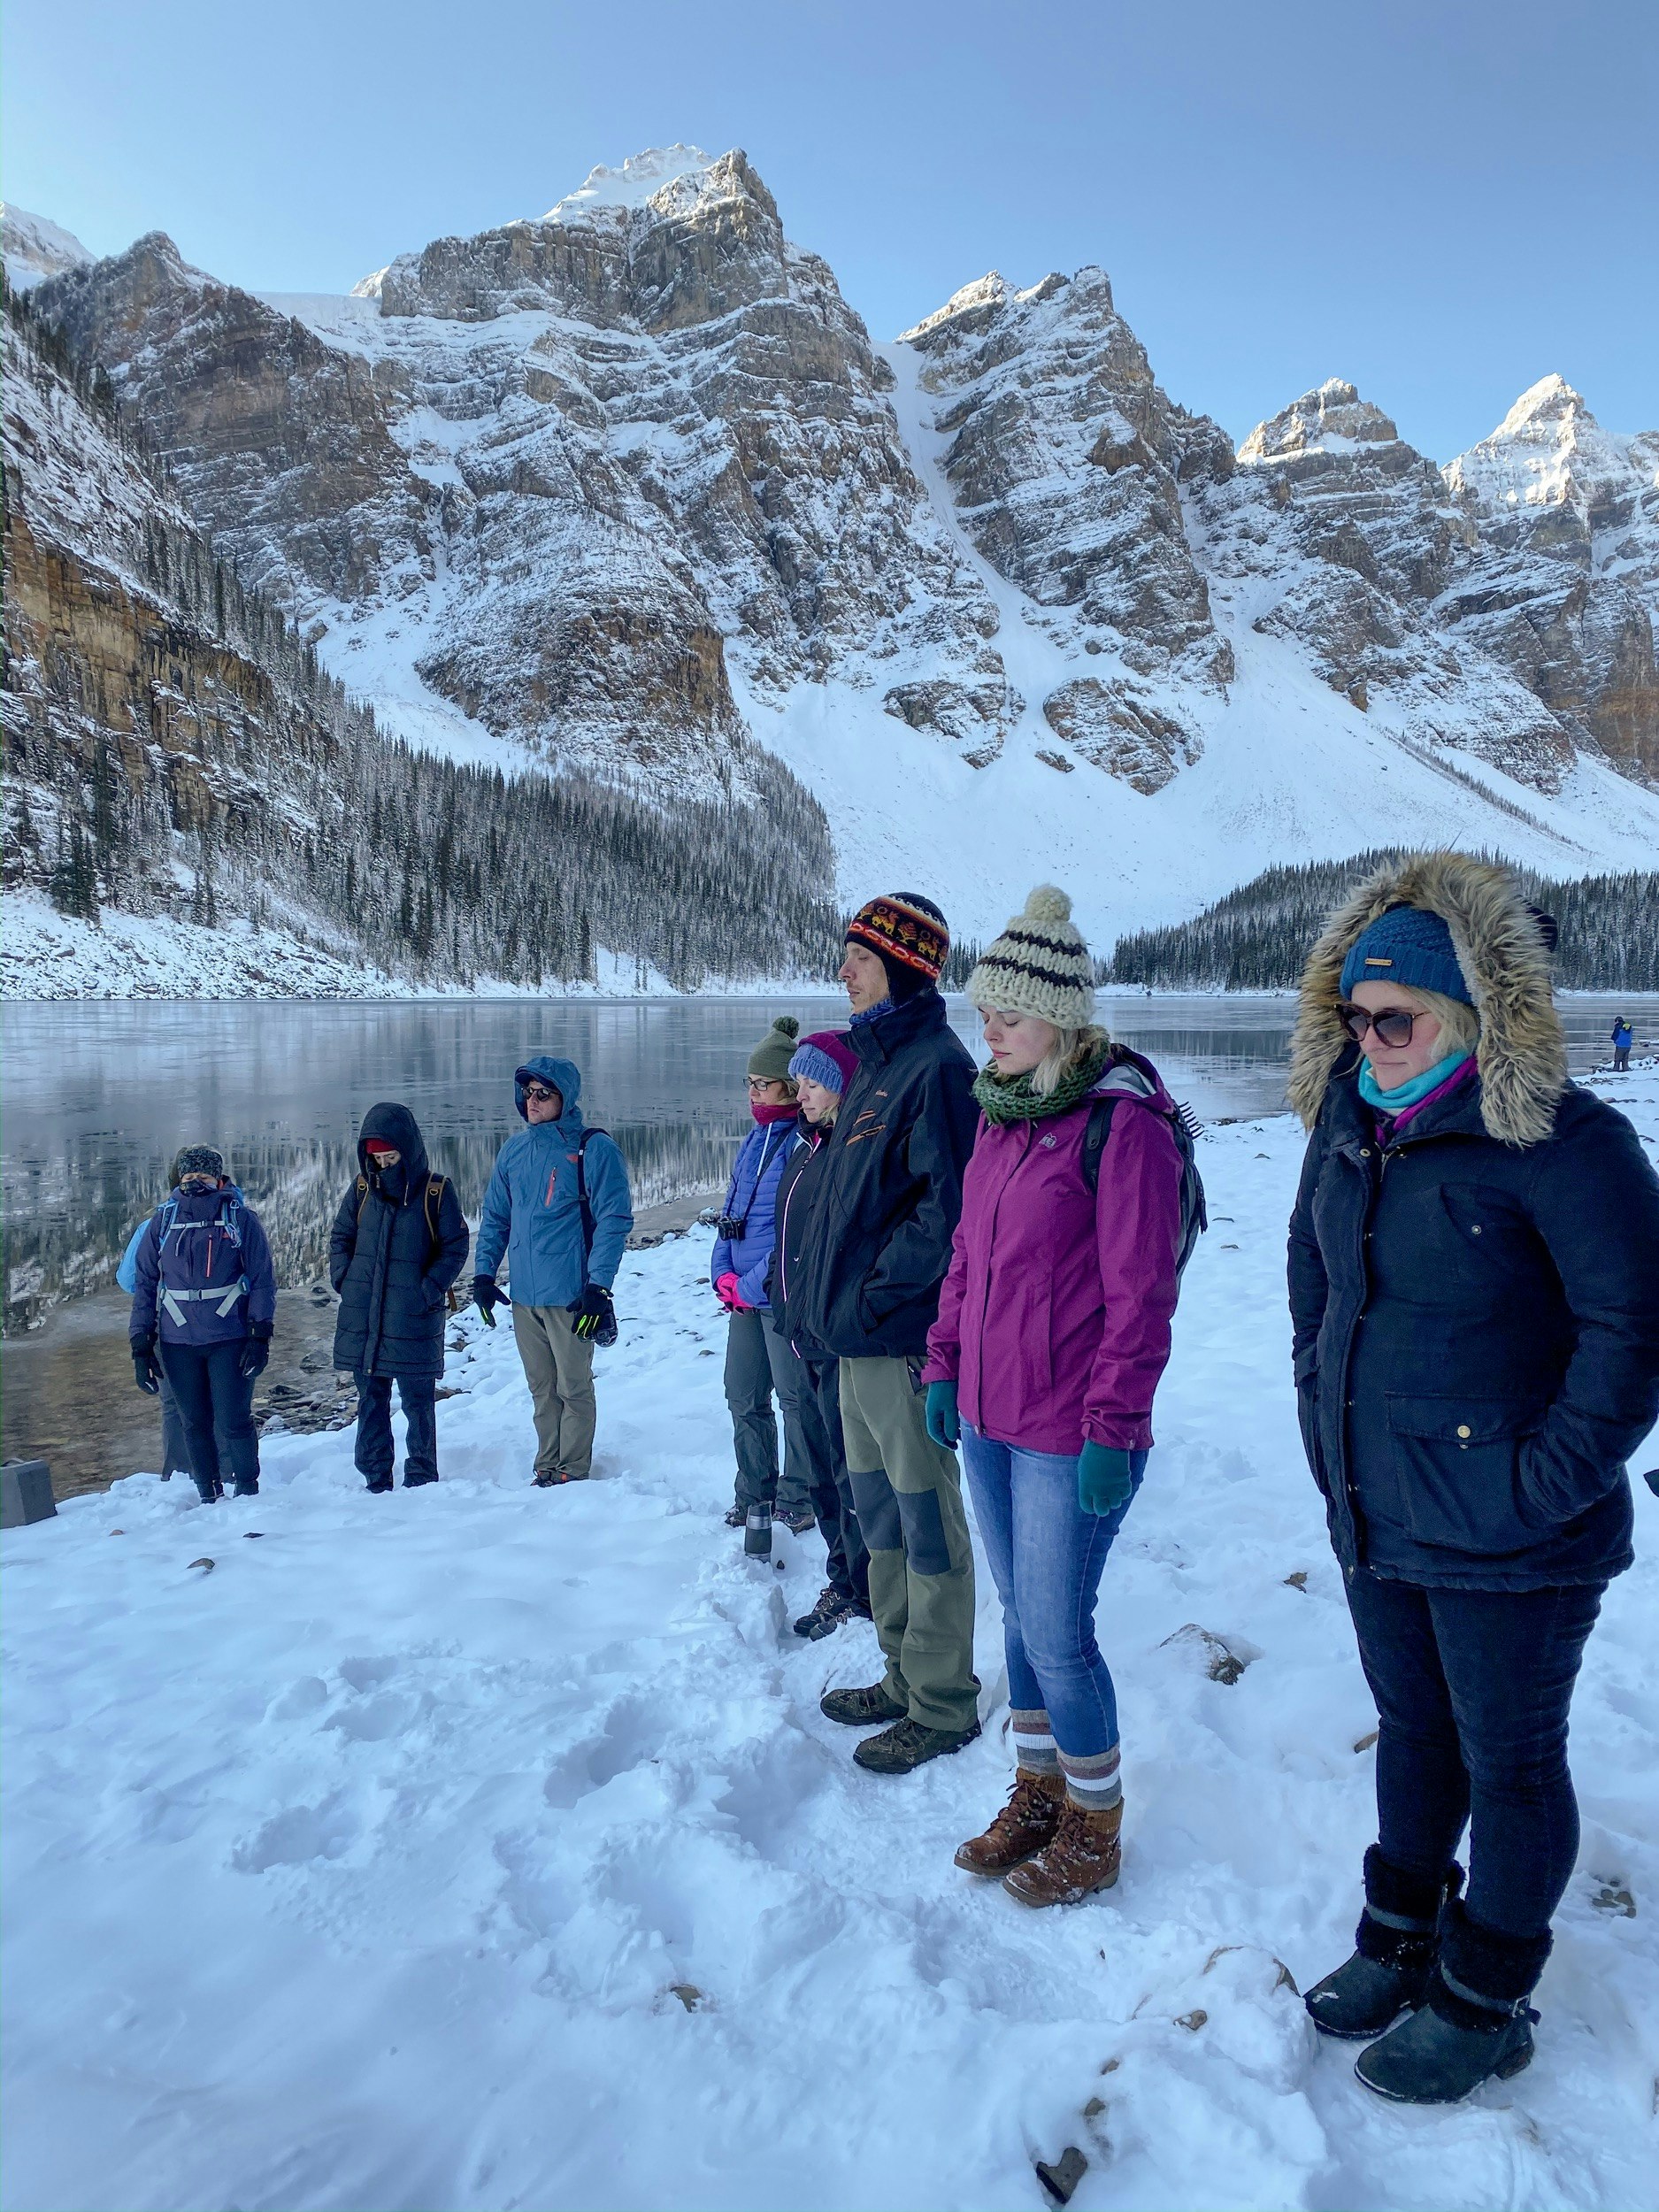 People meditate on the edge of Moraine lake in deep snow during winter at Banff and Lake Louise